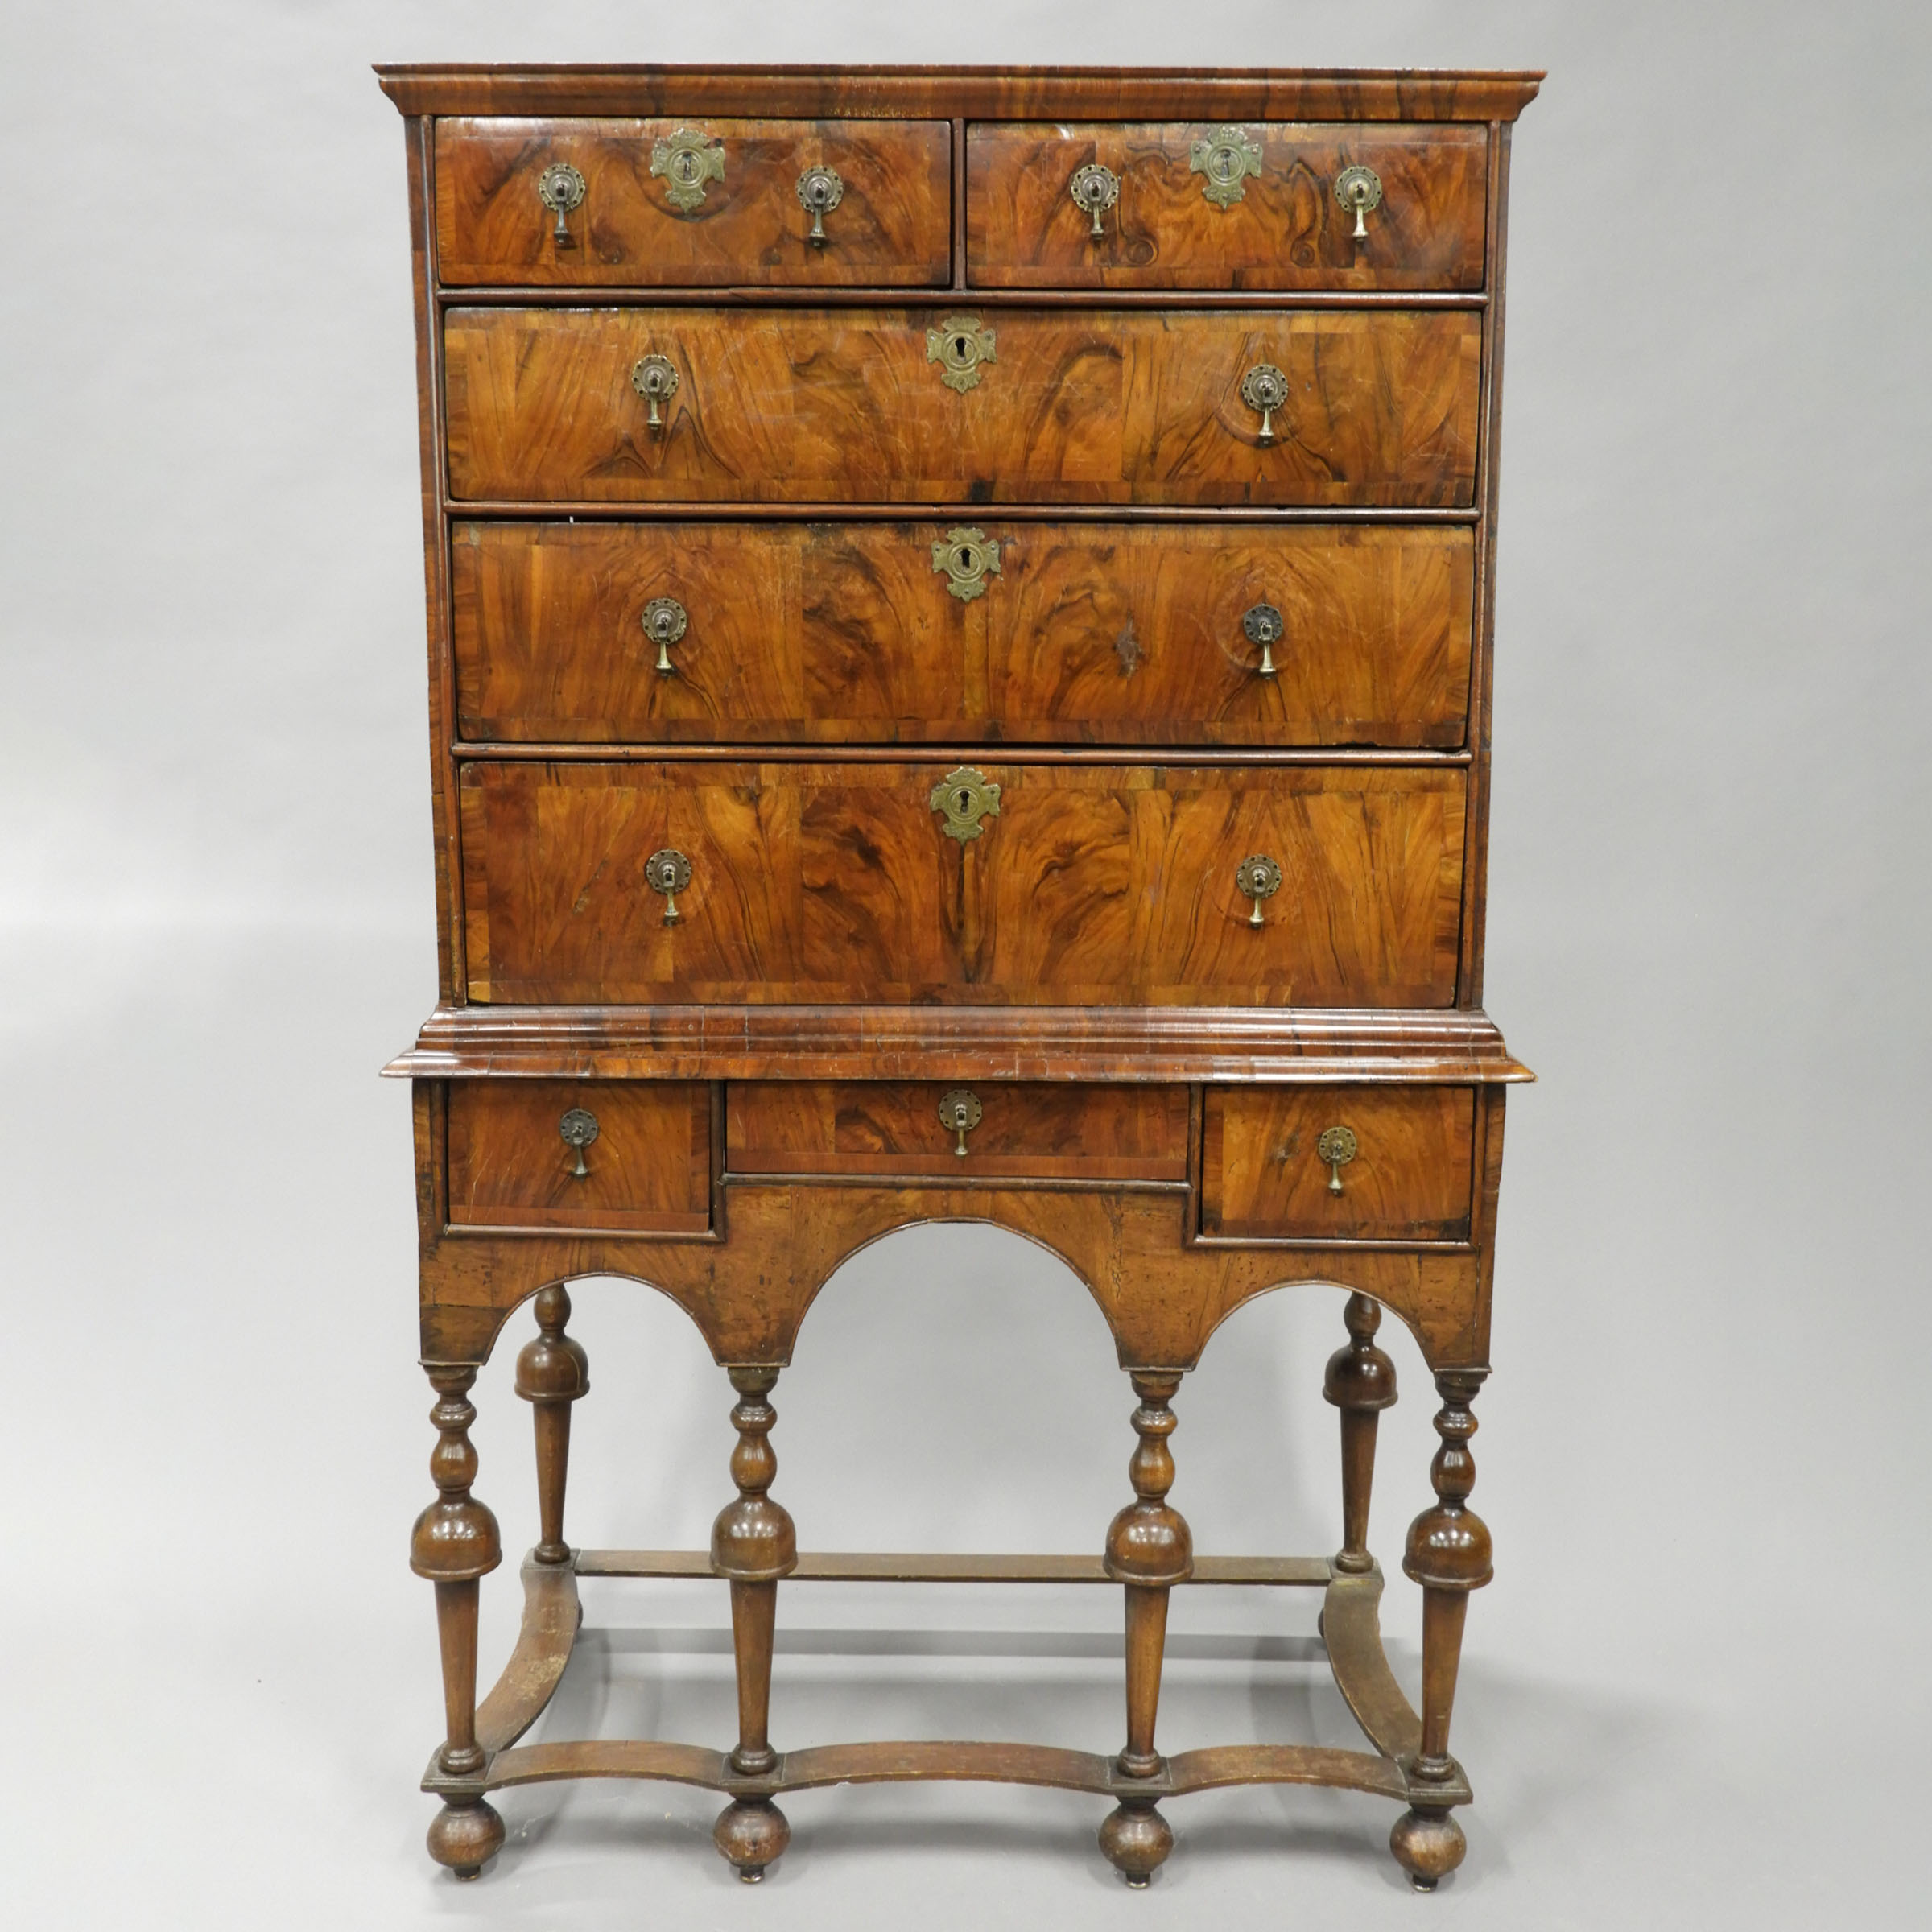 William and Mary Cross Banded Figured Walnut Chest on Stand, early 18th century